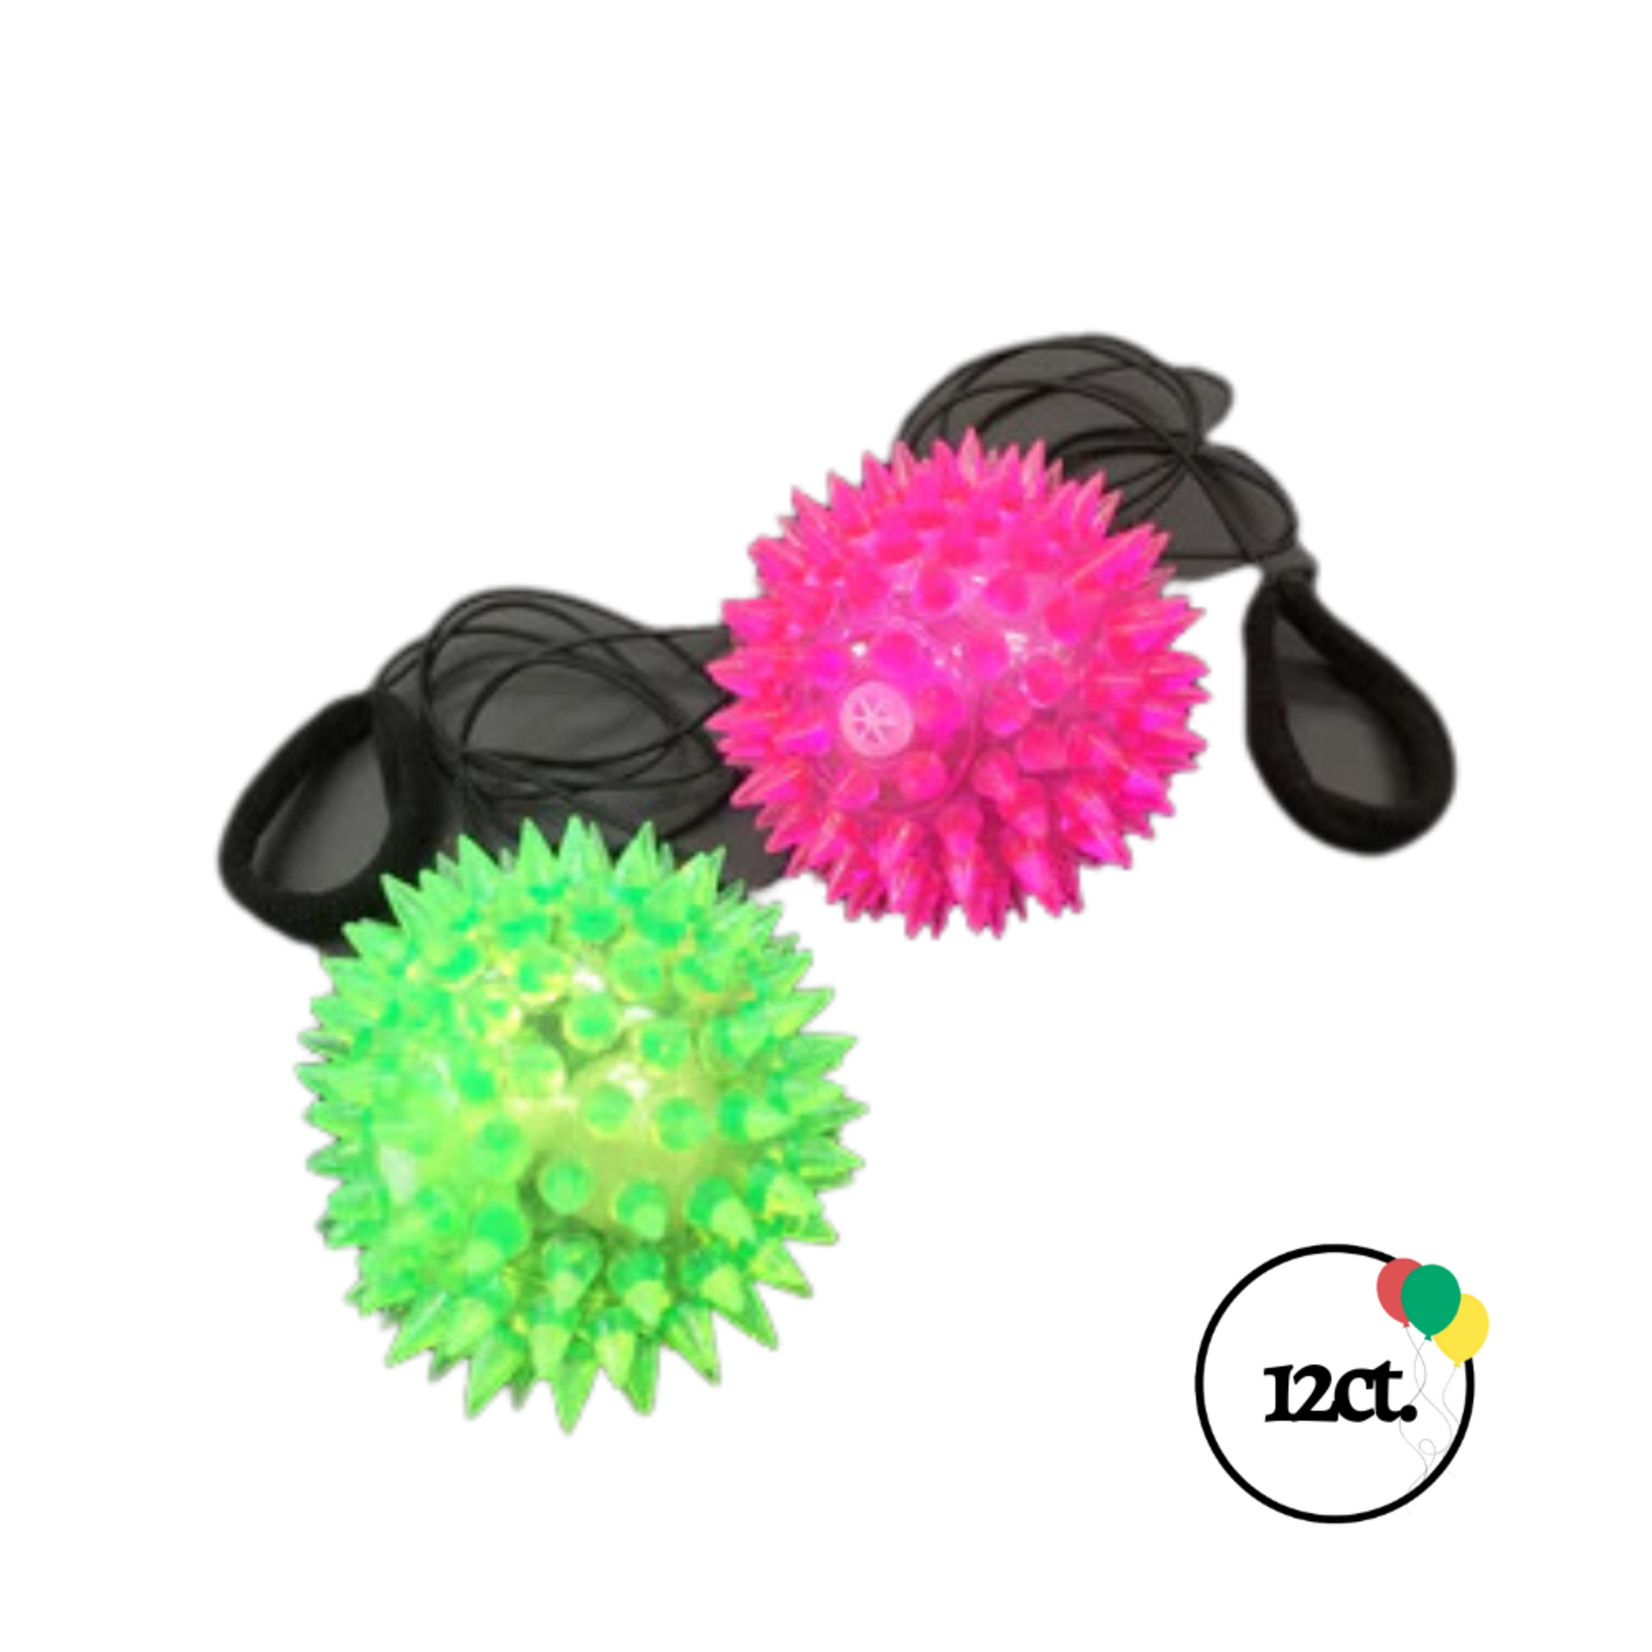 Squeeky Spiky Ball with Return Wristband 12ct